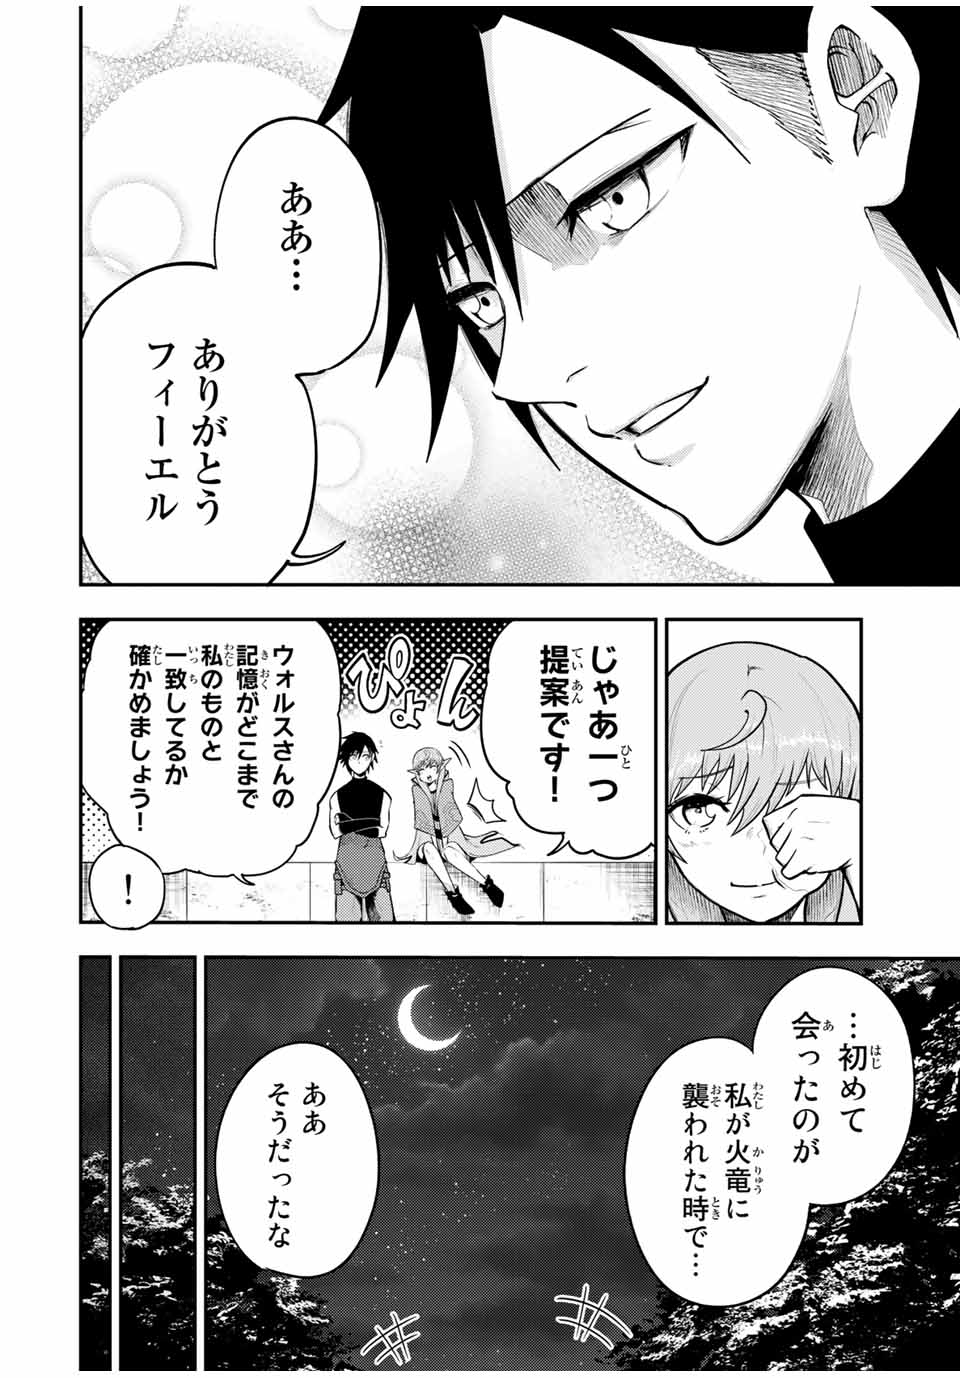 the strongest former prince-; 奴隷転生 ～その奴隷、最強の元王子につき～ 第50話 - Page 8